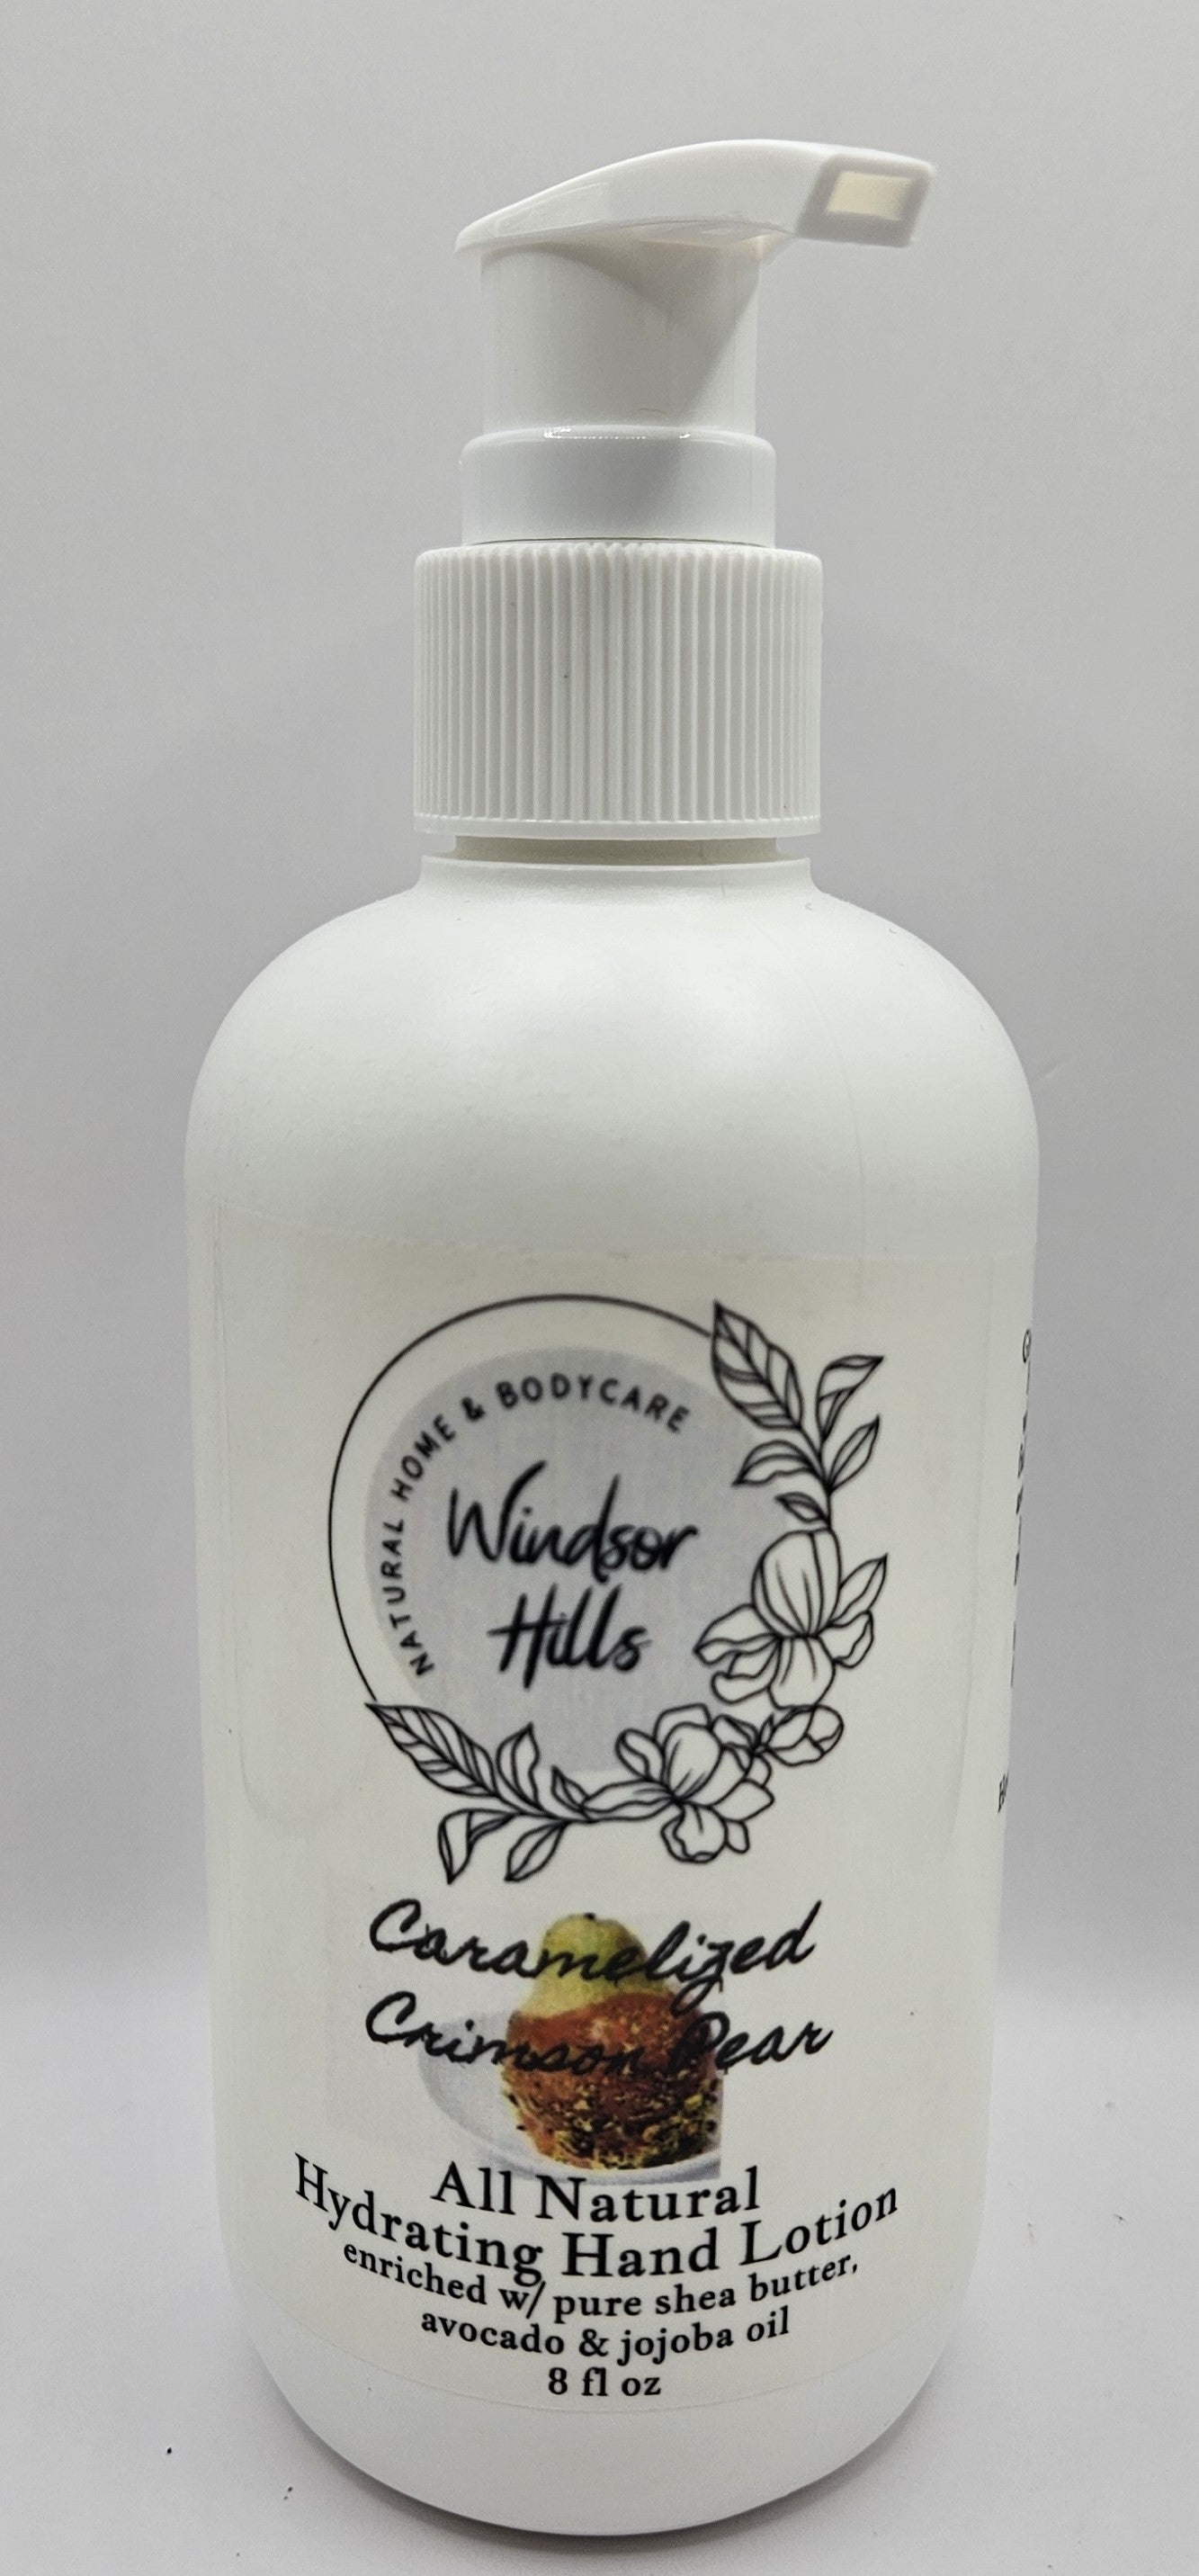 Hydrating Hand Lotion